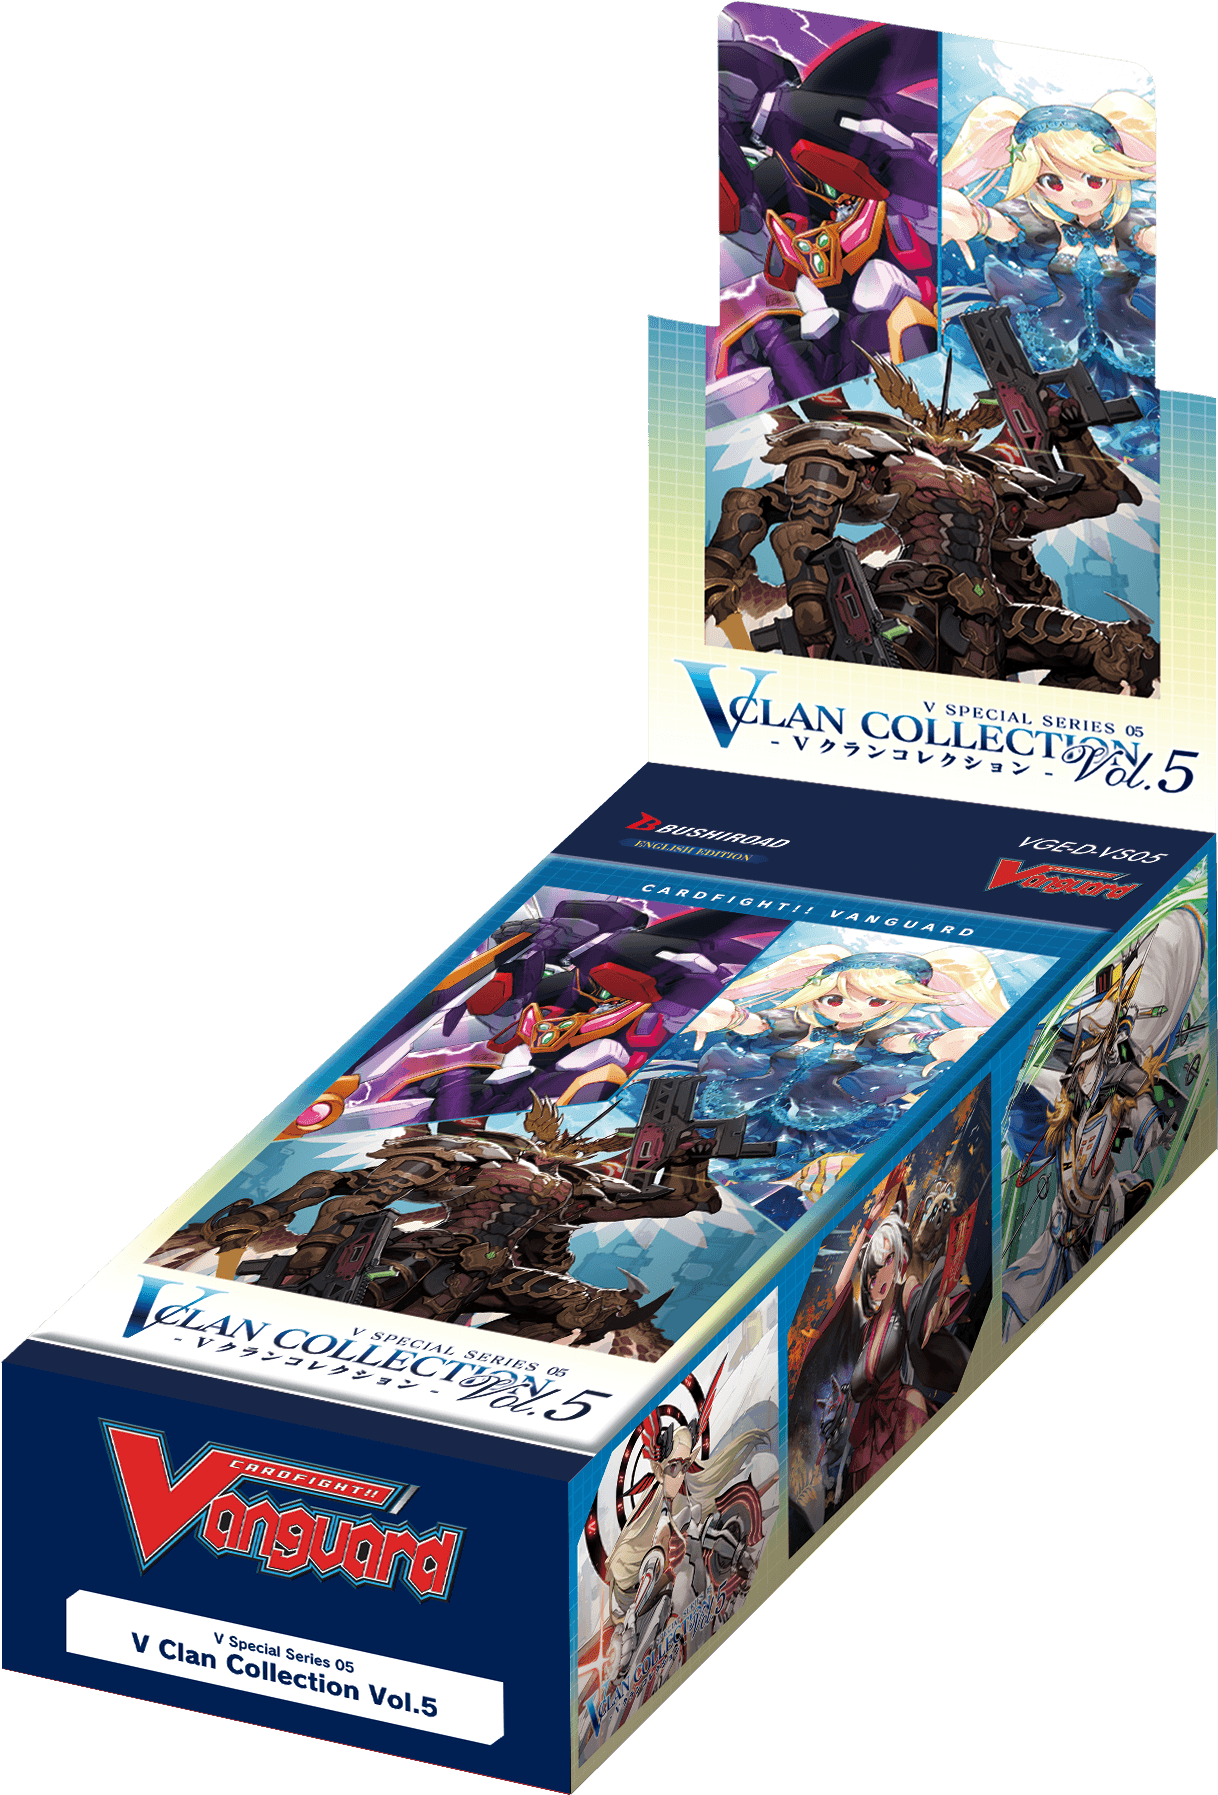 Cardfight!! Vanguard - OverDress: V Special Series - V Clan Collection Vol.5 Booster Box - The Card Vault